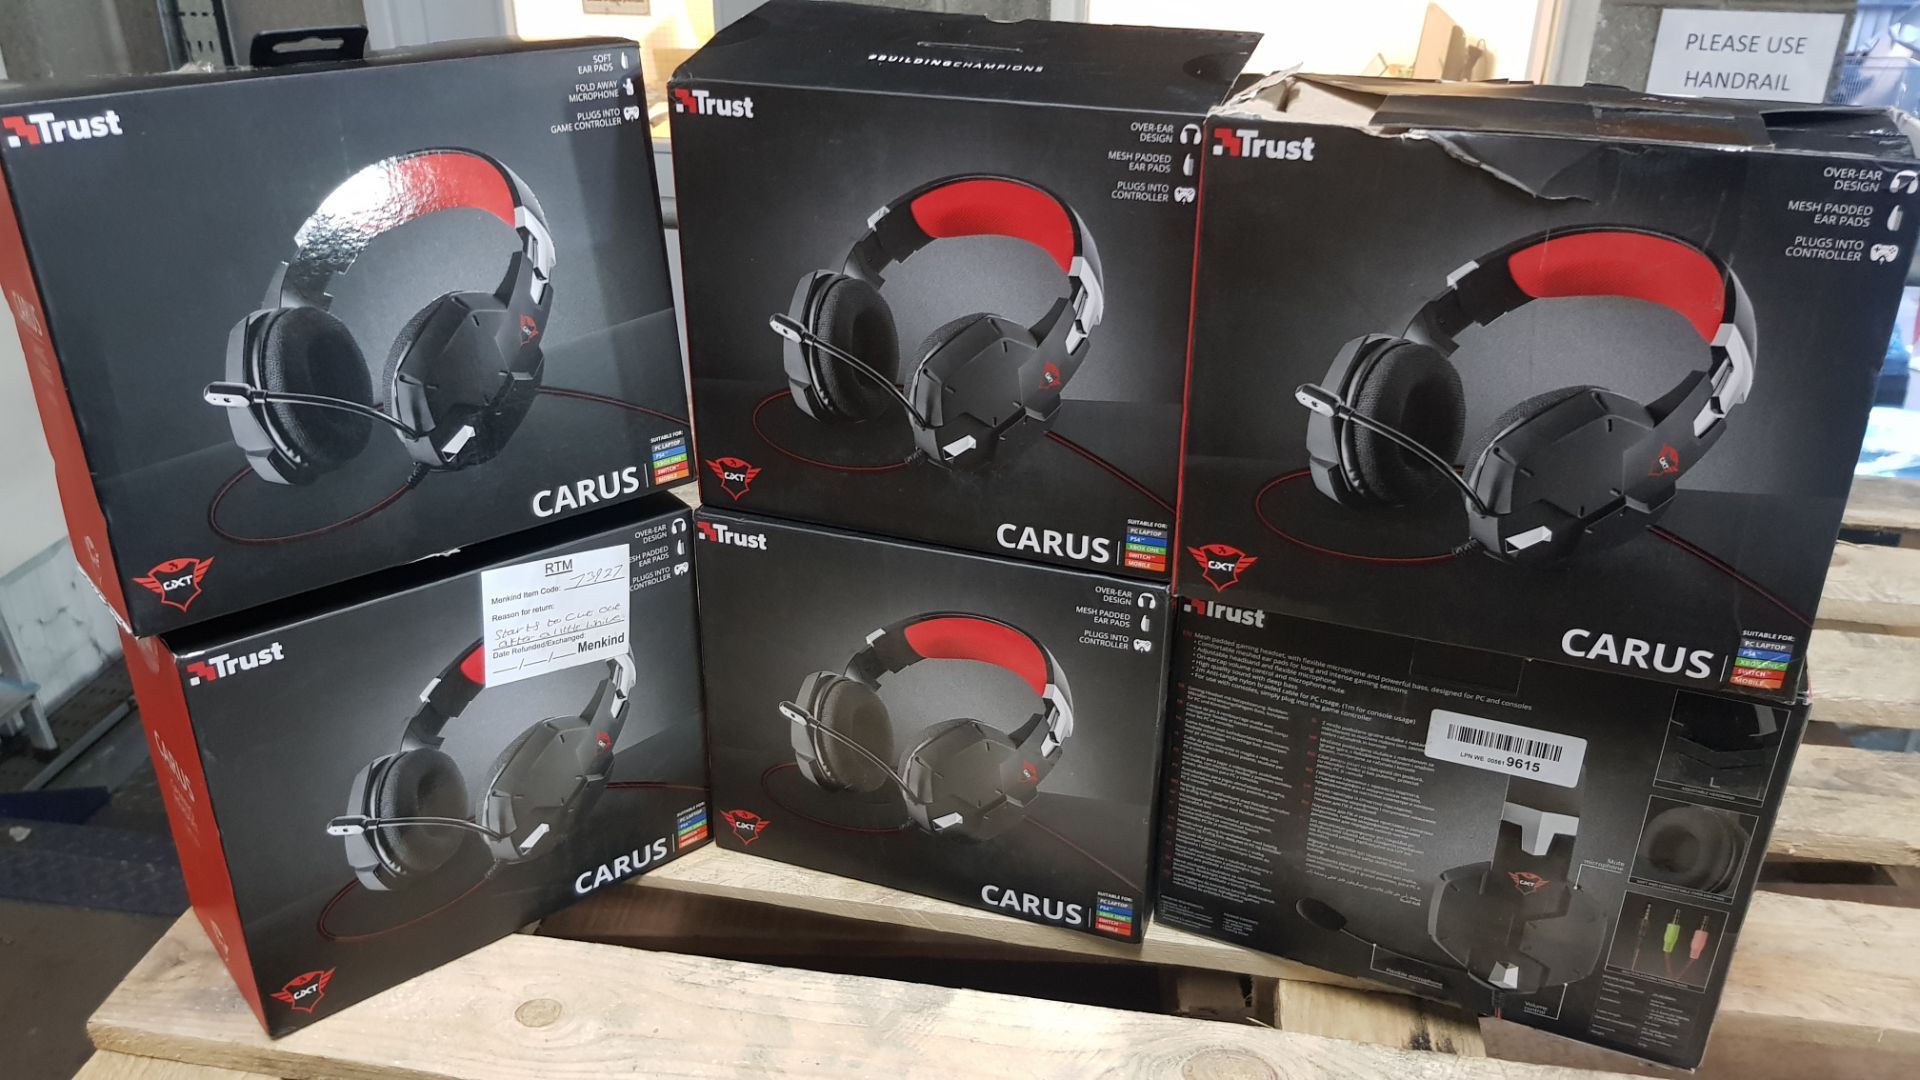 (P5) 6x Trust GXT 322 Carus Multi Platform Gaming Headset RRP £29.99 Each. (Units Have Return To Ma - Image 3 of 3